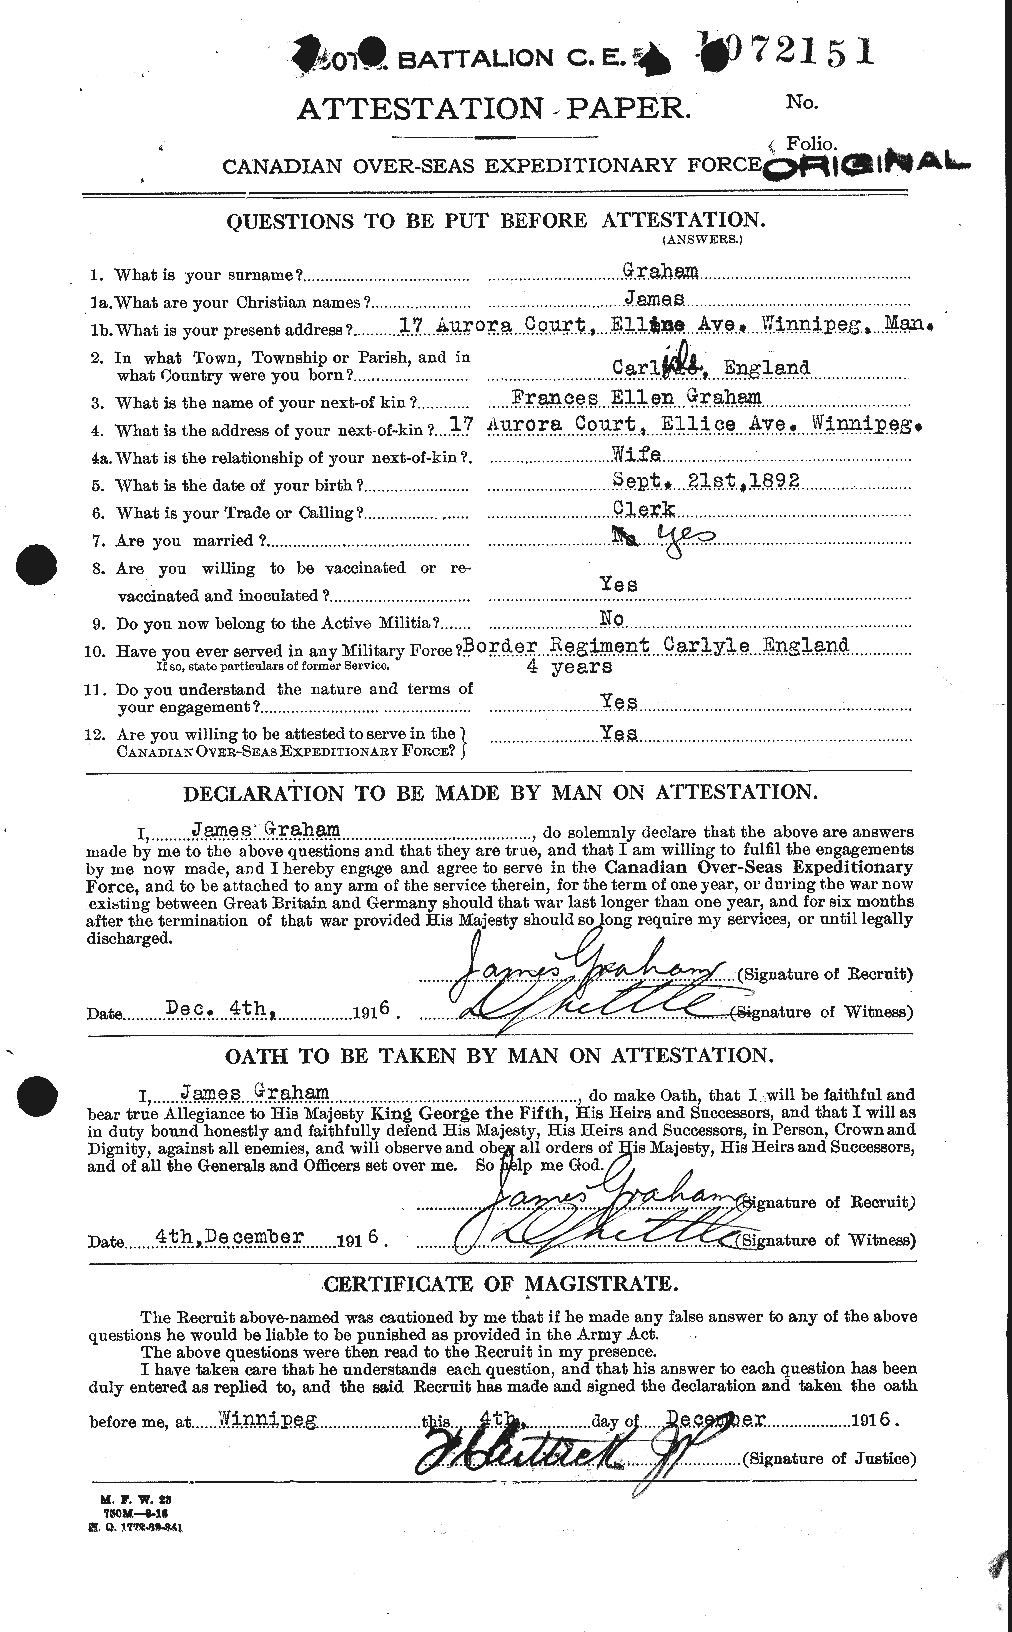 Personnel Records of the First World War - CEF 357788a